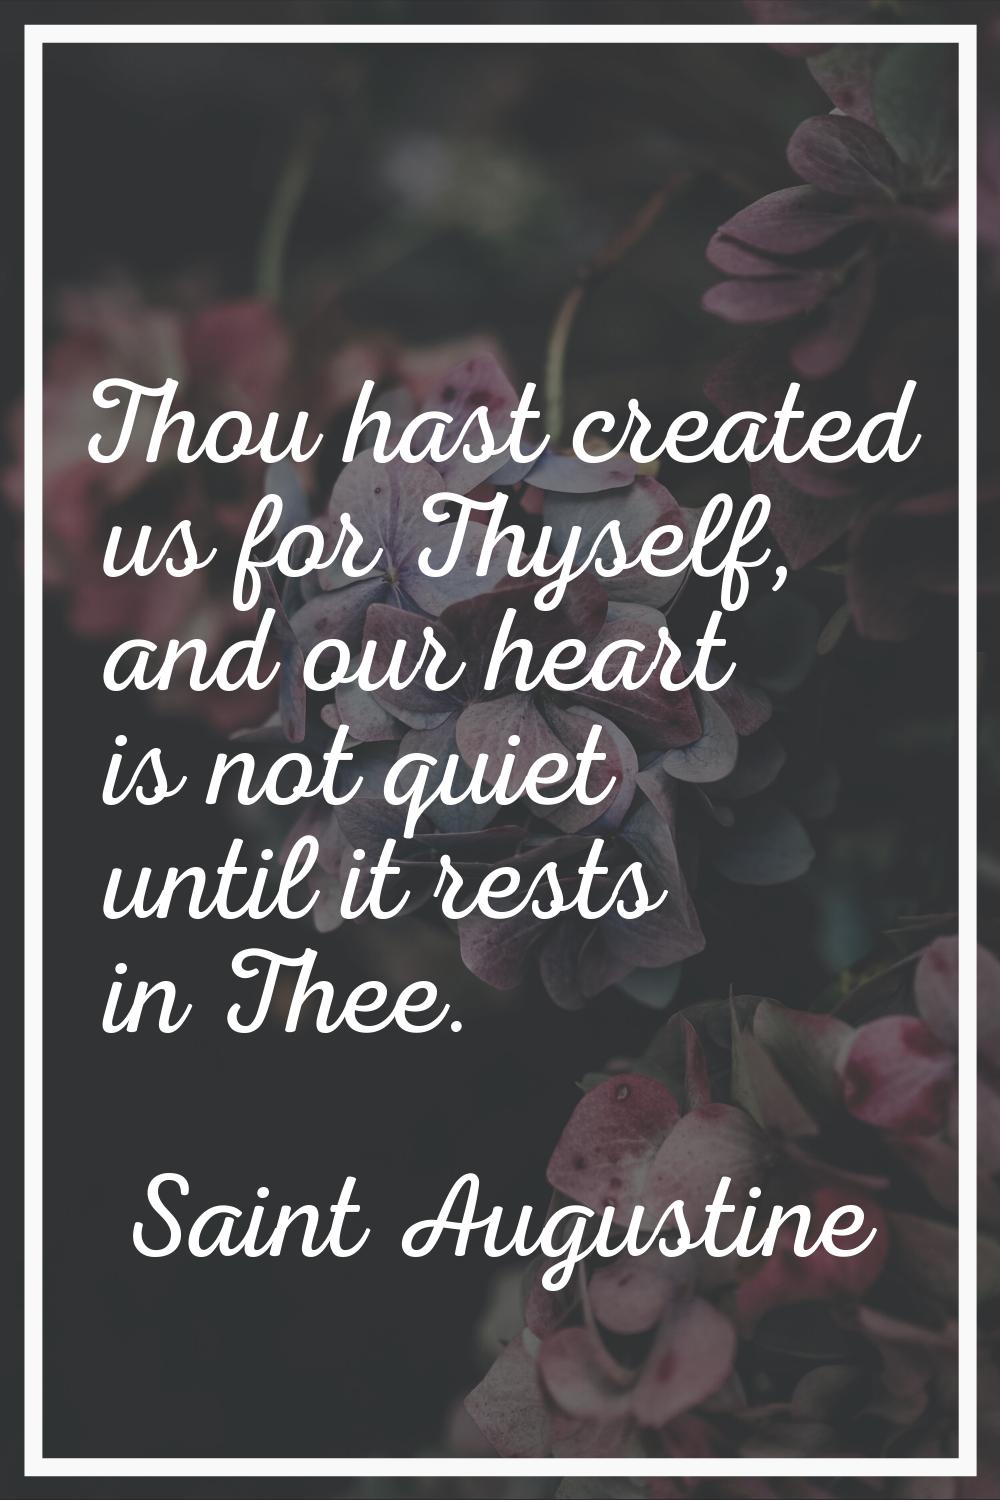 Thou hast created us for Thyself, and our heart is not quiet until it rests in Thee.